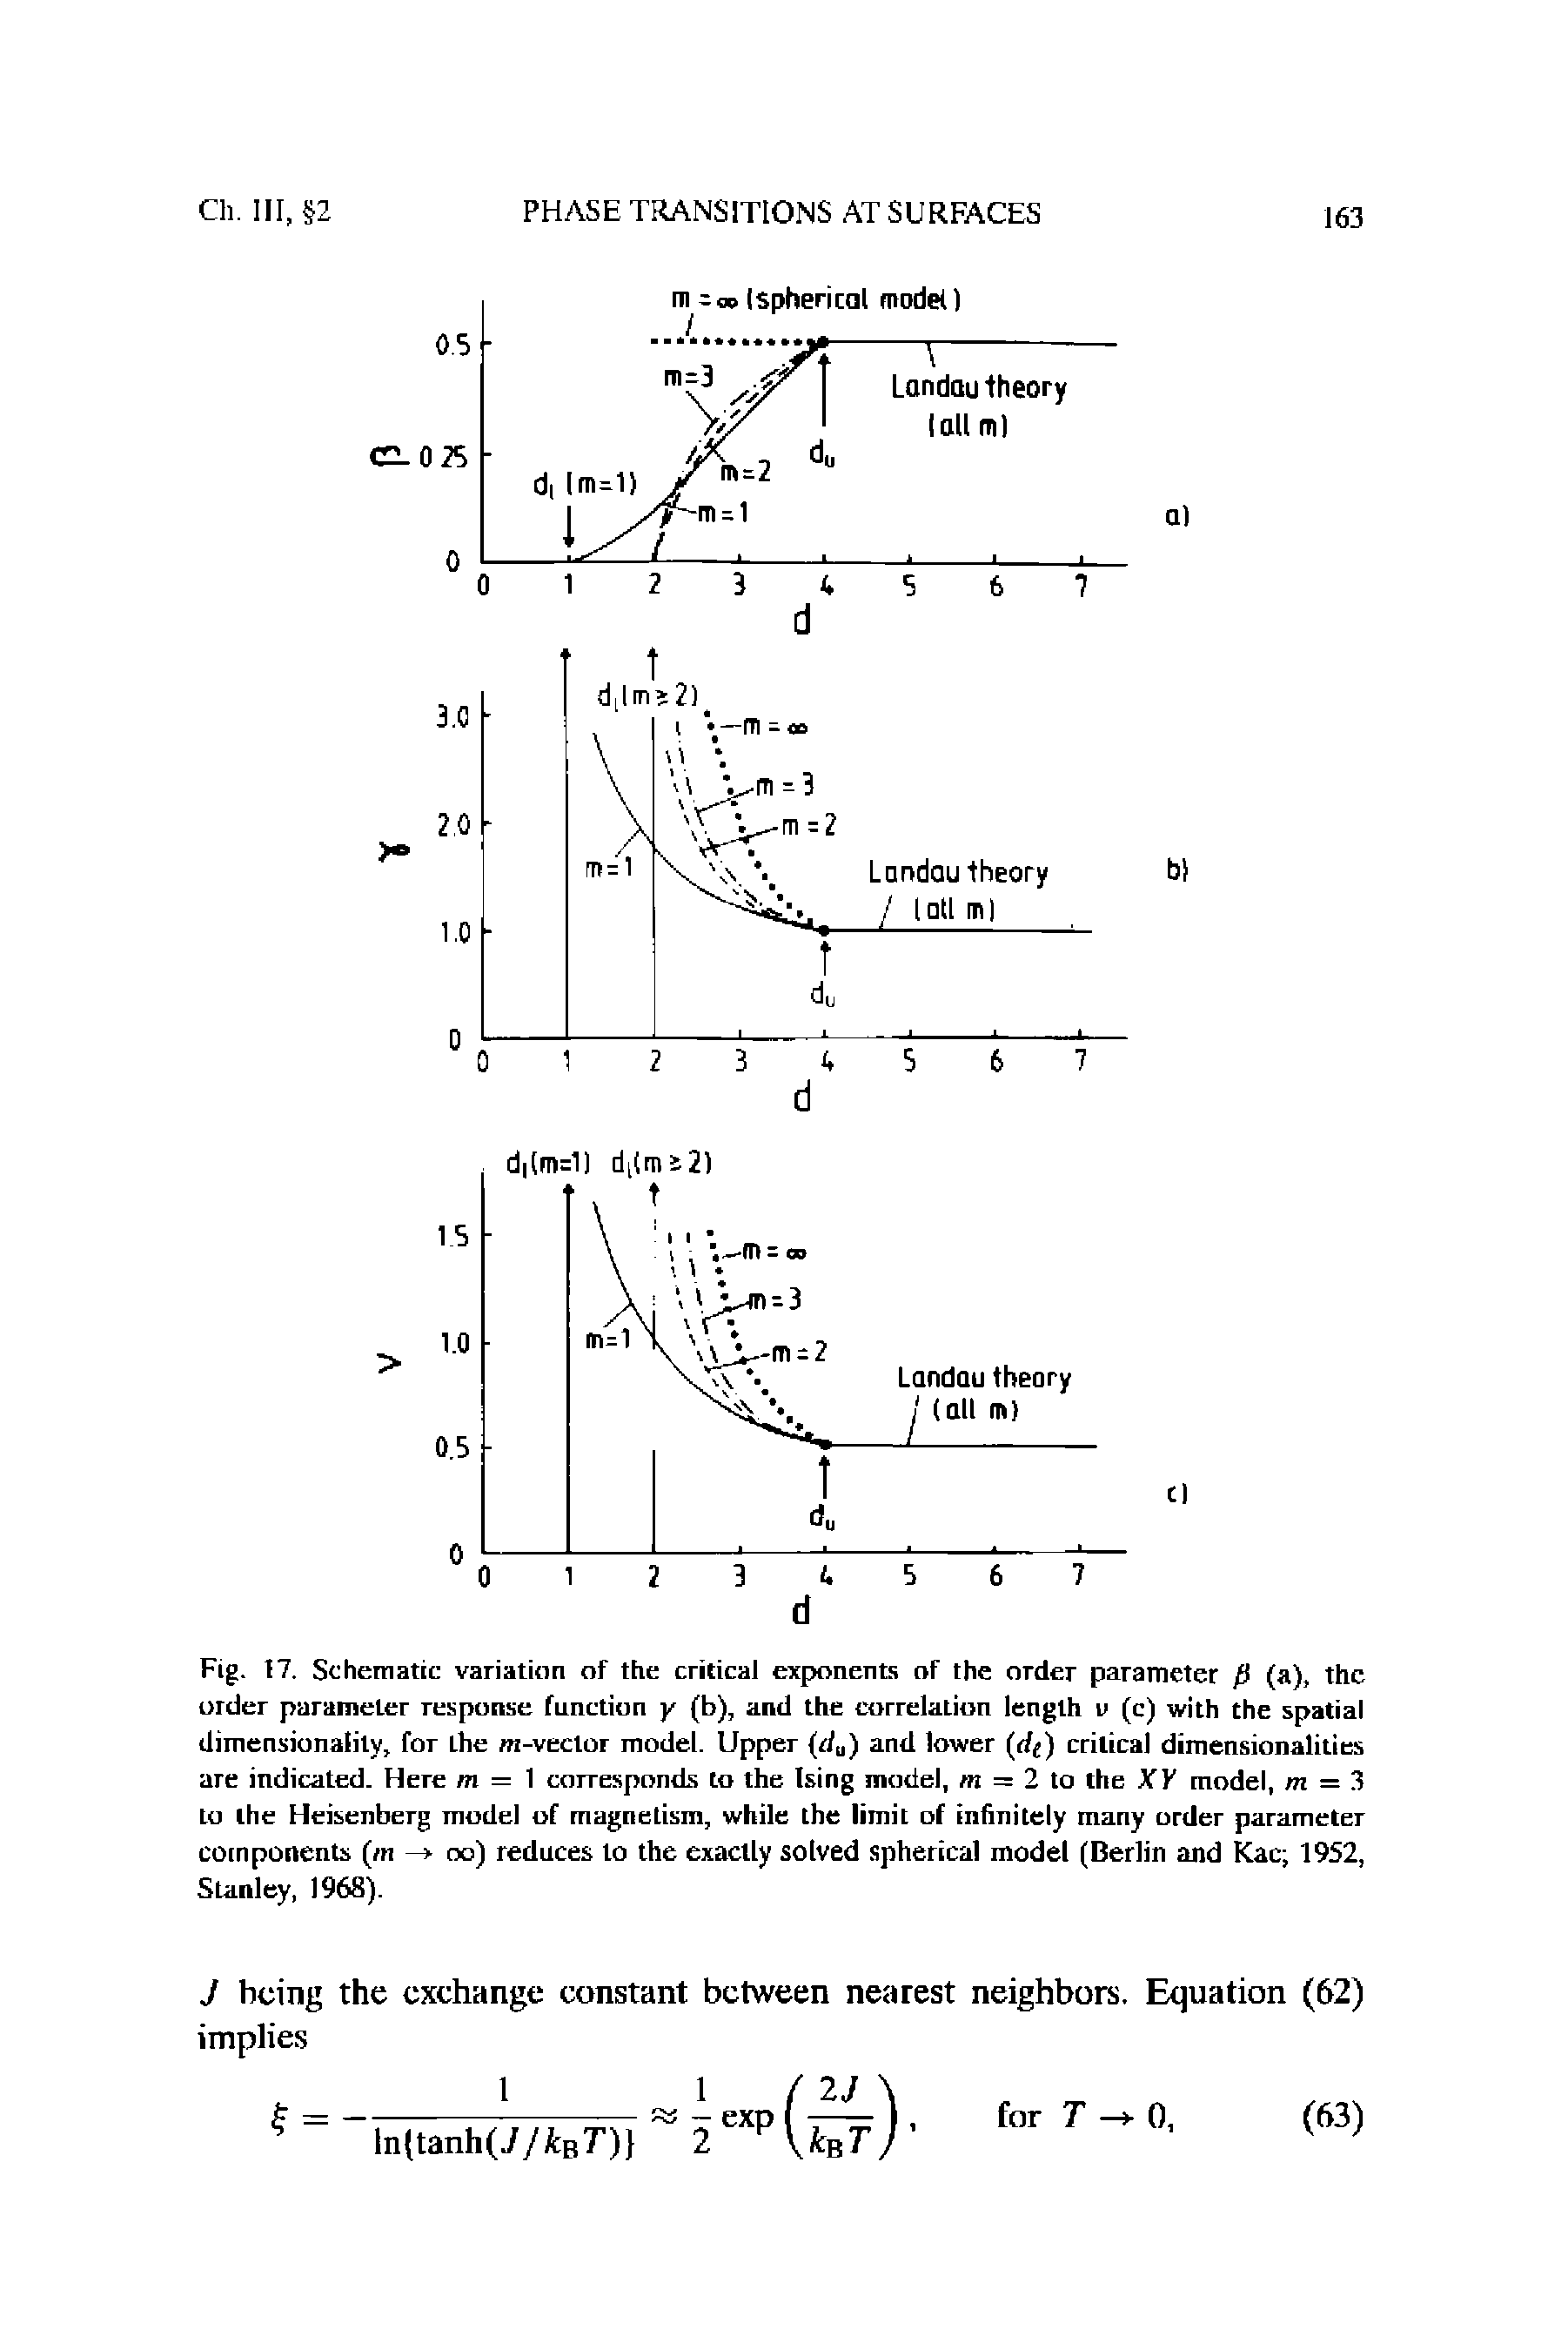 Fig. 17. Schematic variation of the critical exponents of the order parameter fi (a), the order parameter response function y (b), and the correlation length v (c) with the spatial dimensionality, for Lhe m-veclor model. Upper (du) and lower (rf ) critical dimensionalities are indicated. Here m = 1 corresponds to the Ising model, m = 2 to the XY model, m = 3 to the Heisenberg model of magneLism, while the limit of infinitely many order parameter components (m —> oo) reduces to the exactly solved spherical model (Berlin and Kac 1952, Stanley, 1968).